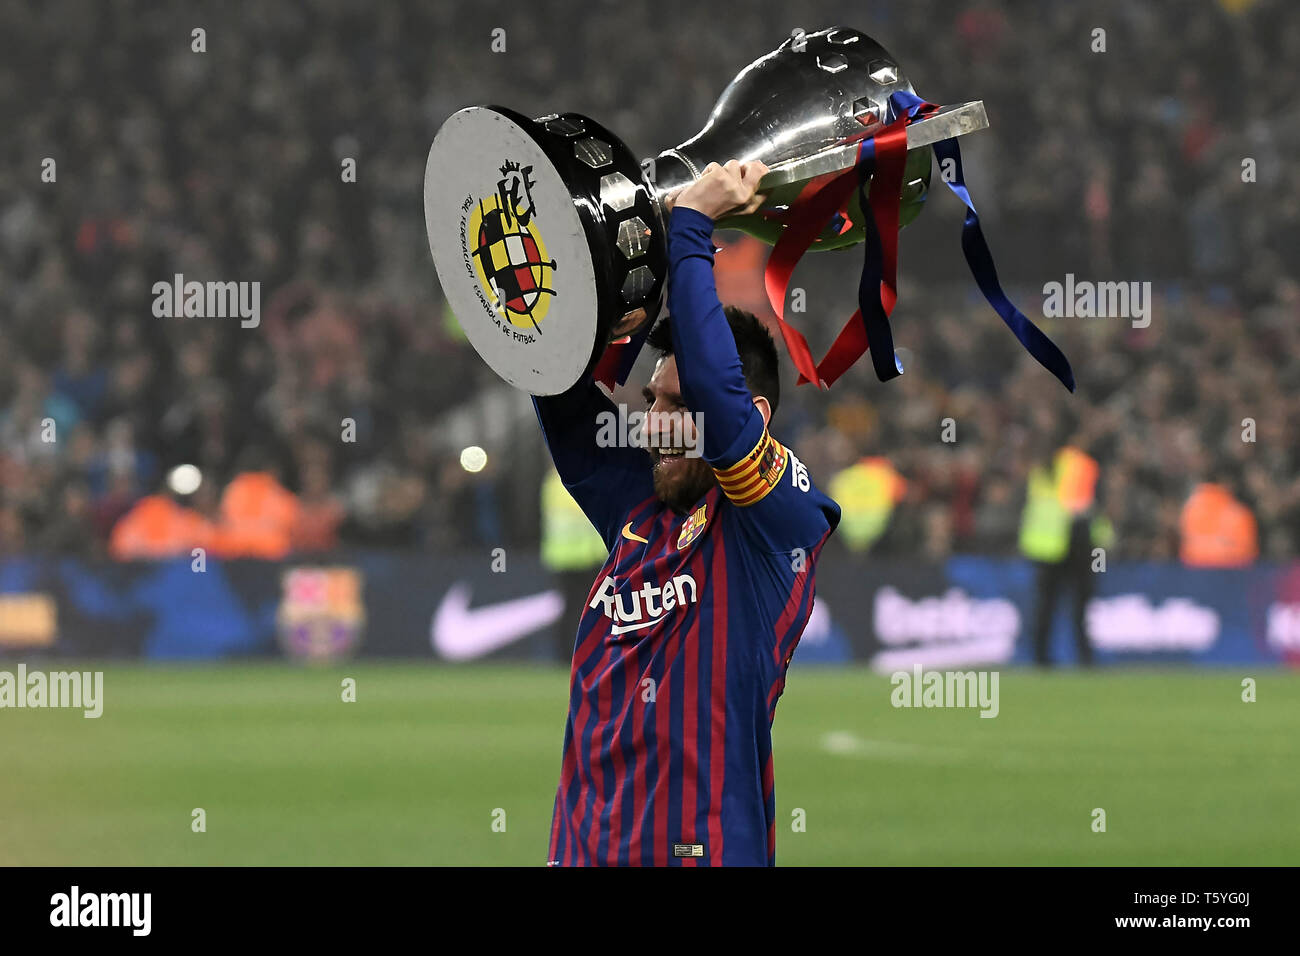 Barcelona 27 04 2019 Laliga 2018 2019 Date 35 Barcelona Levante Lionel Messi Of Fc Barcelona Received The Laliga Cup Champion During The Match Barcelona Levante Stock Photo Alamy